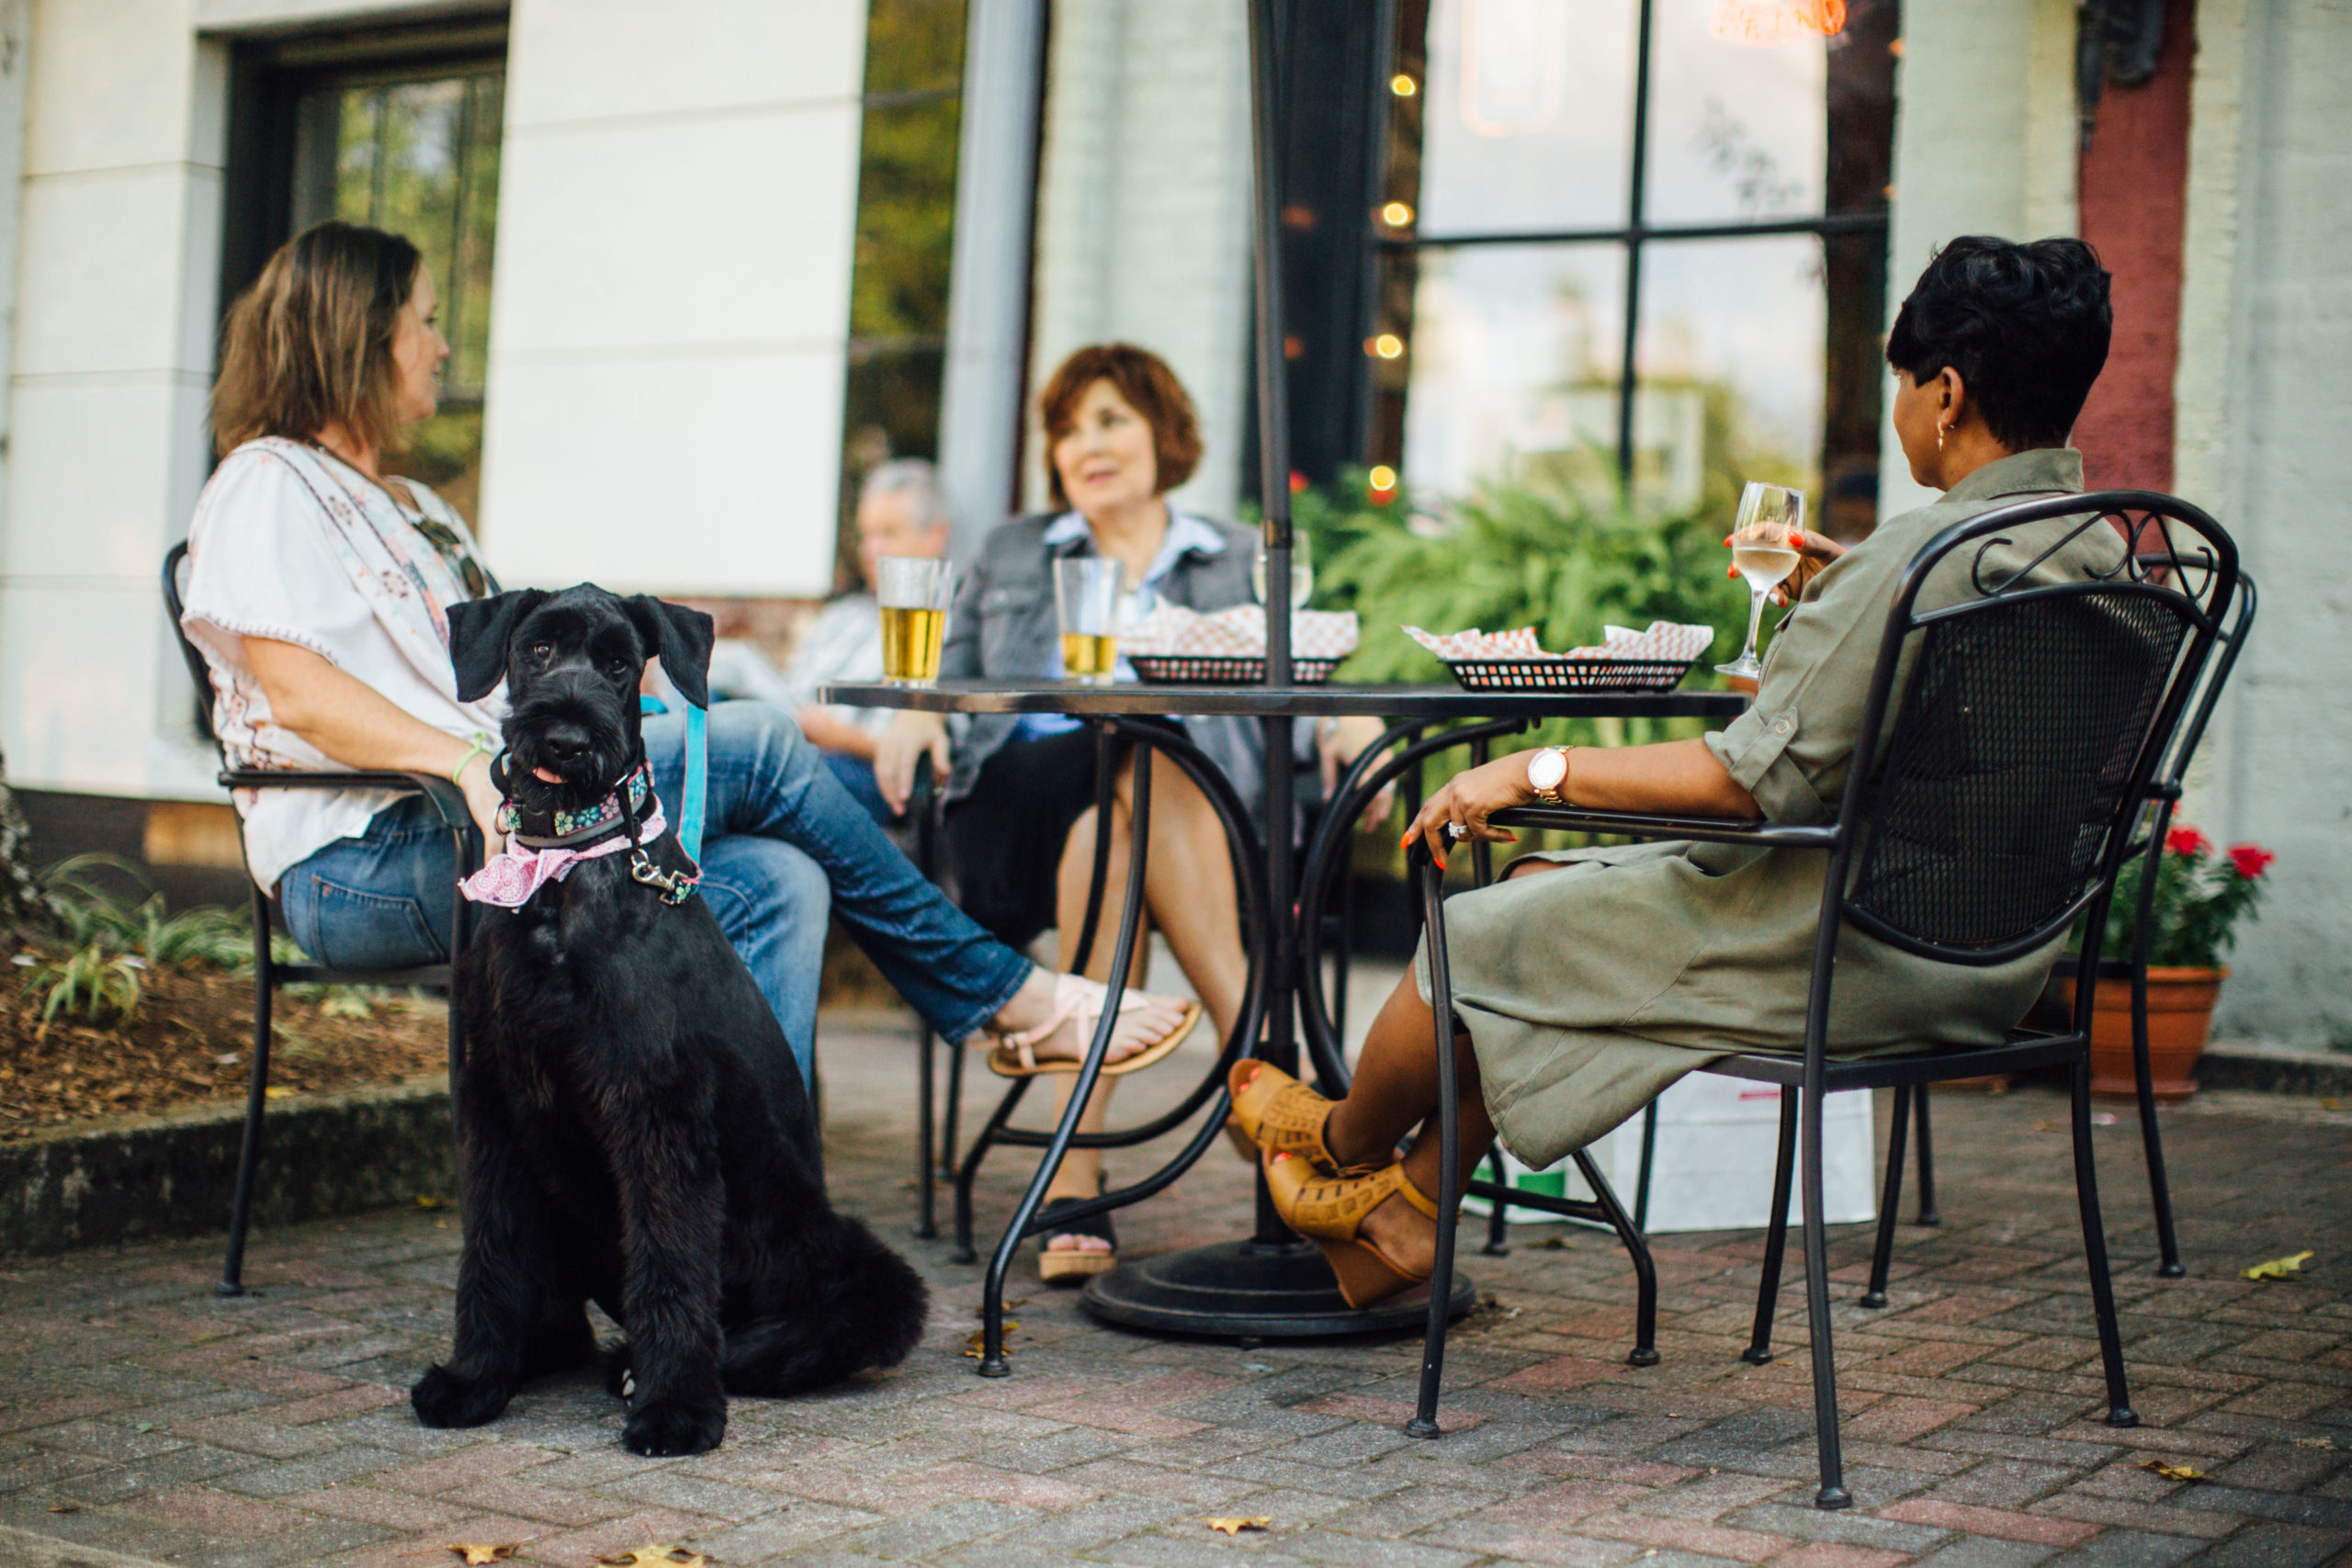 Women dining with a dog downtown on the sidewalks